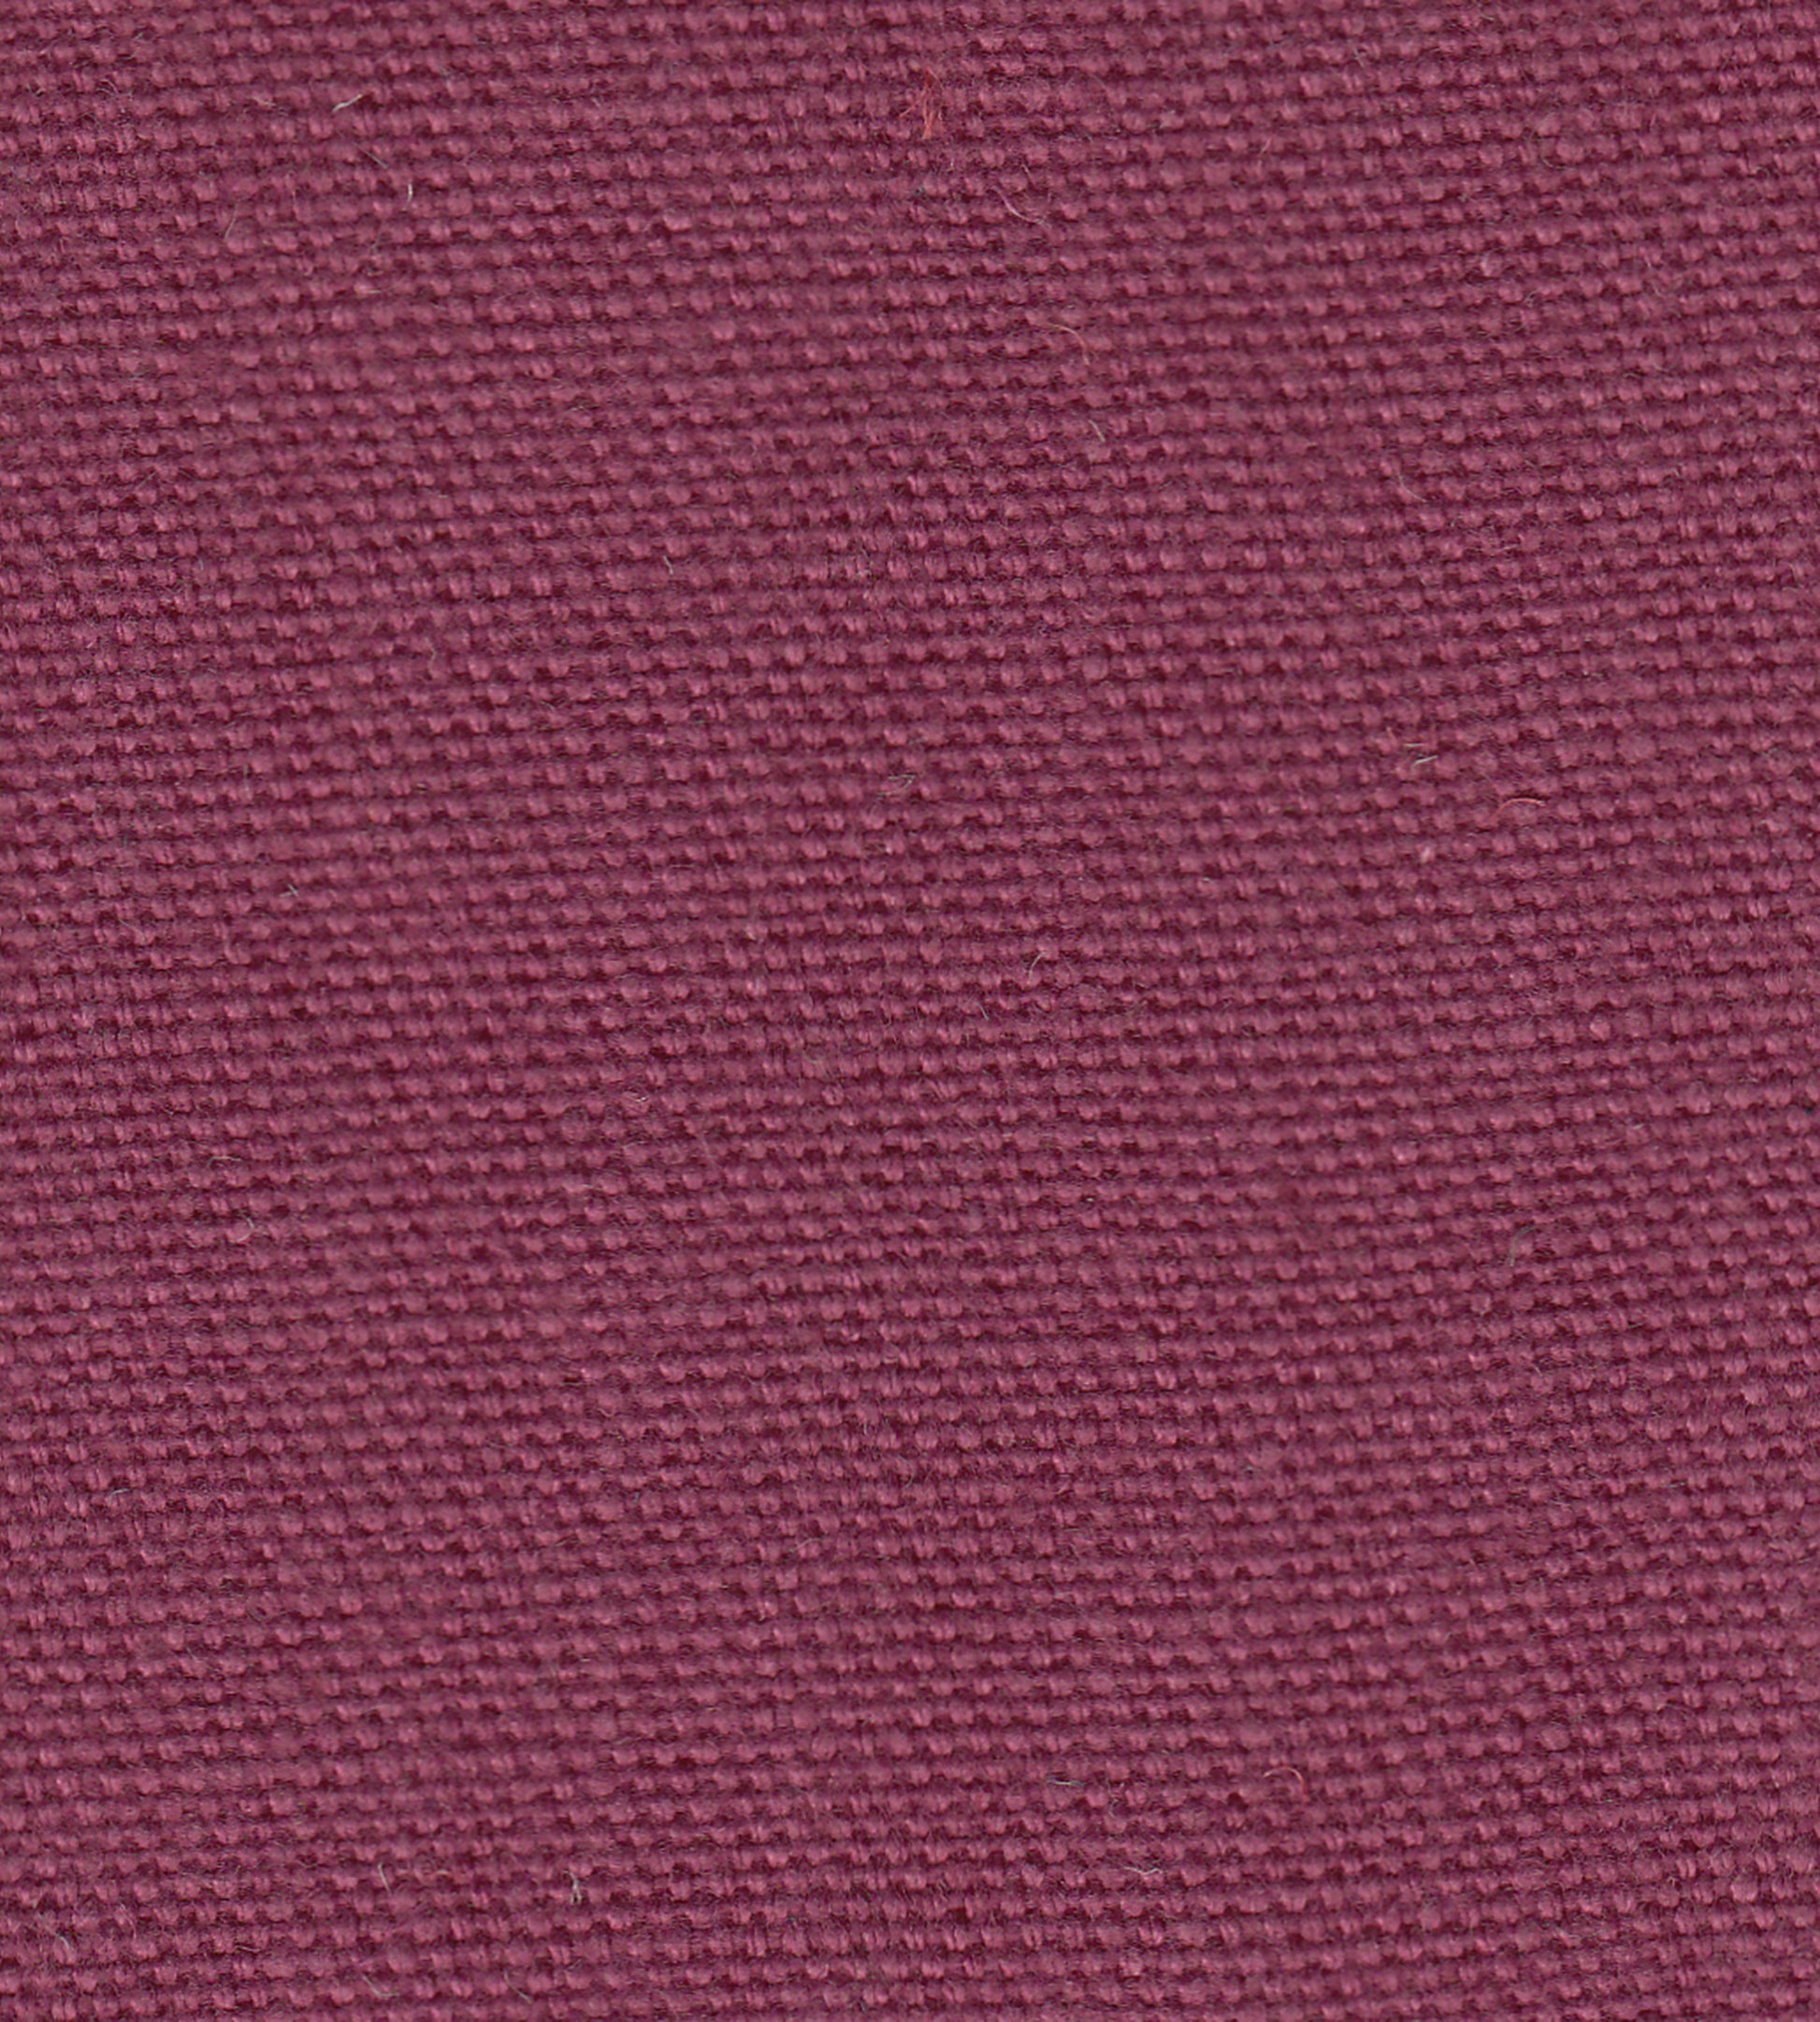 Purchase Old World Weavers Fabric Item# F1 0009T272, Toile Lin 272 Bordeaux 1